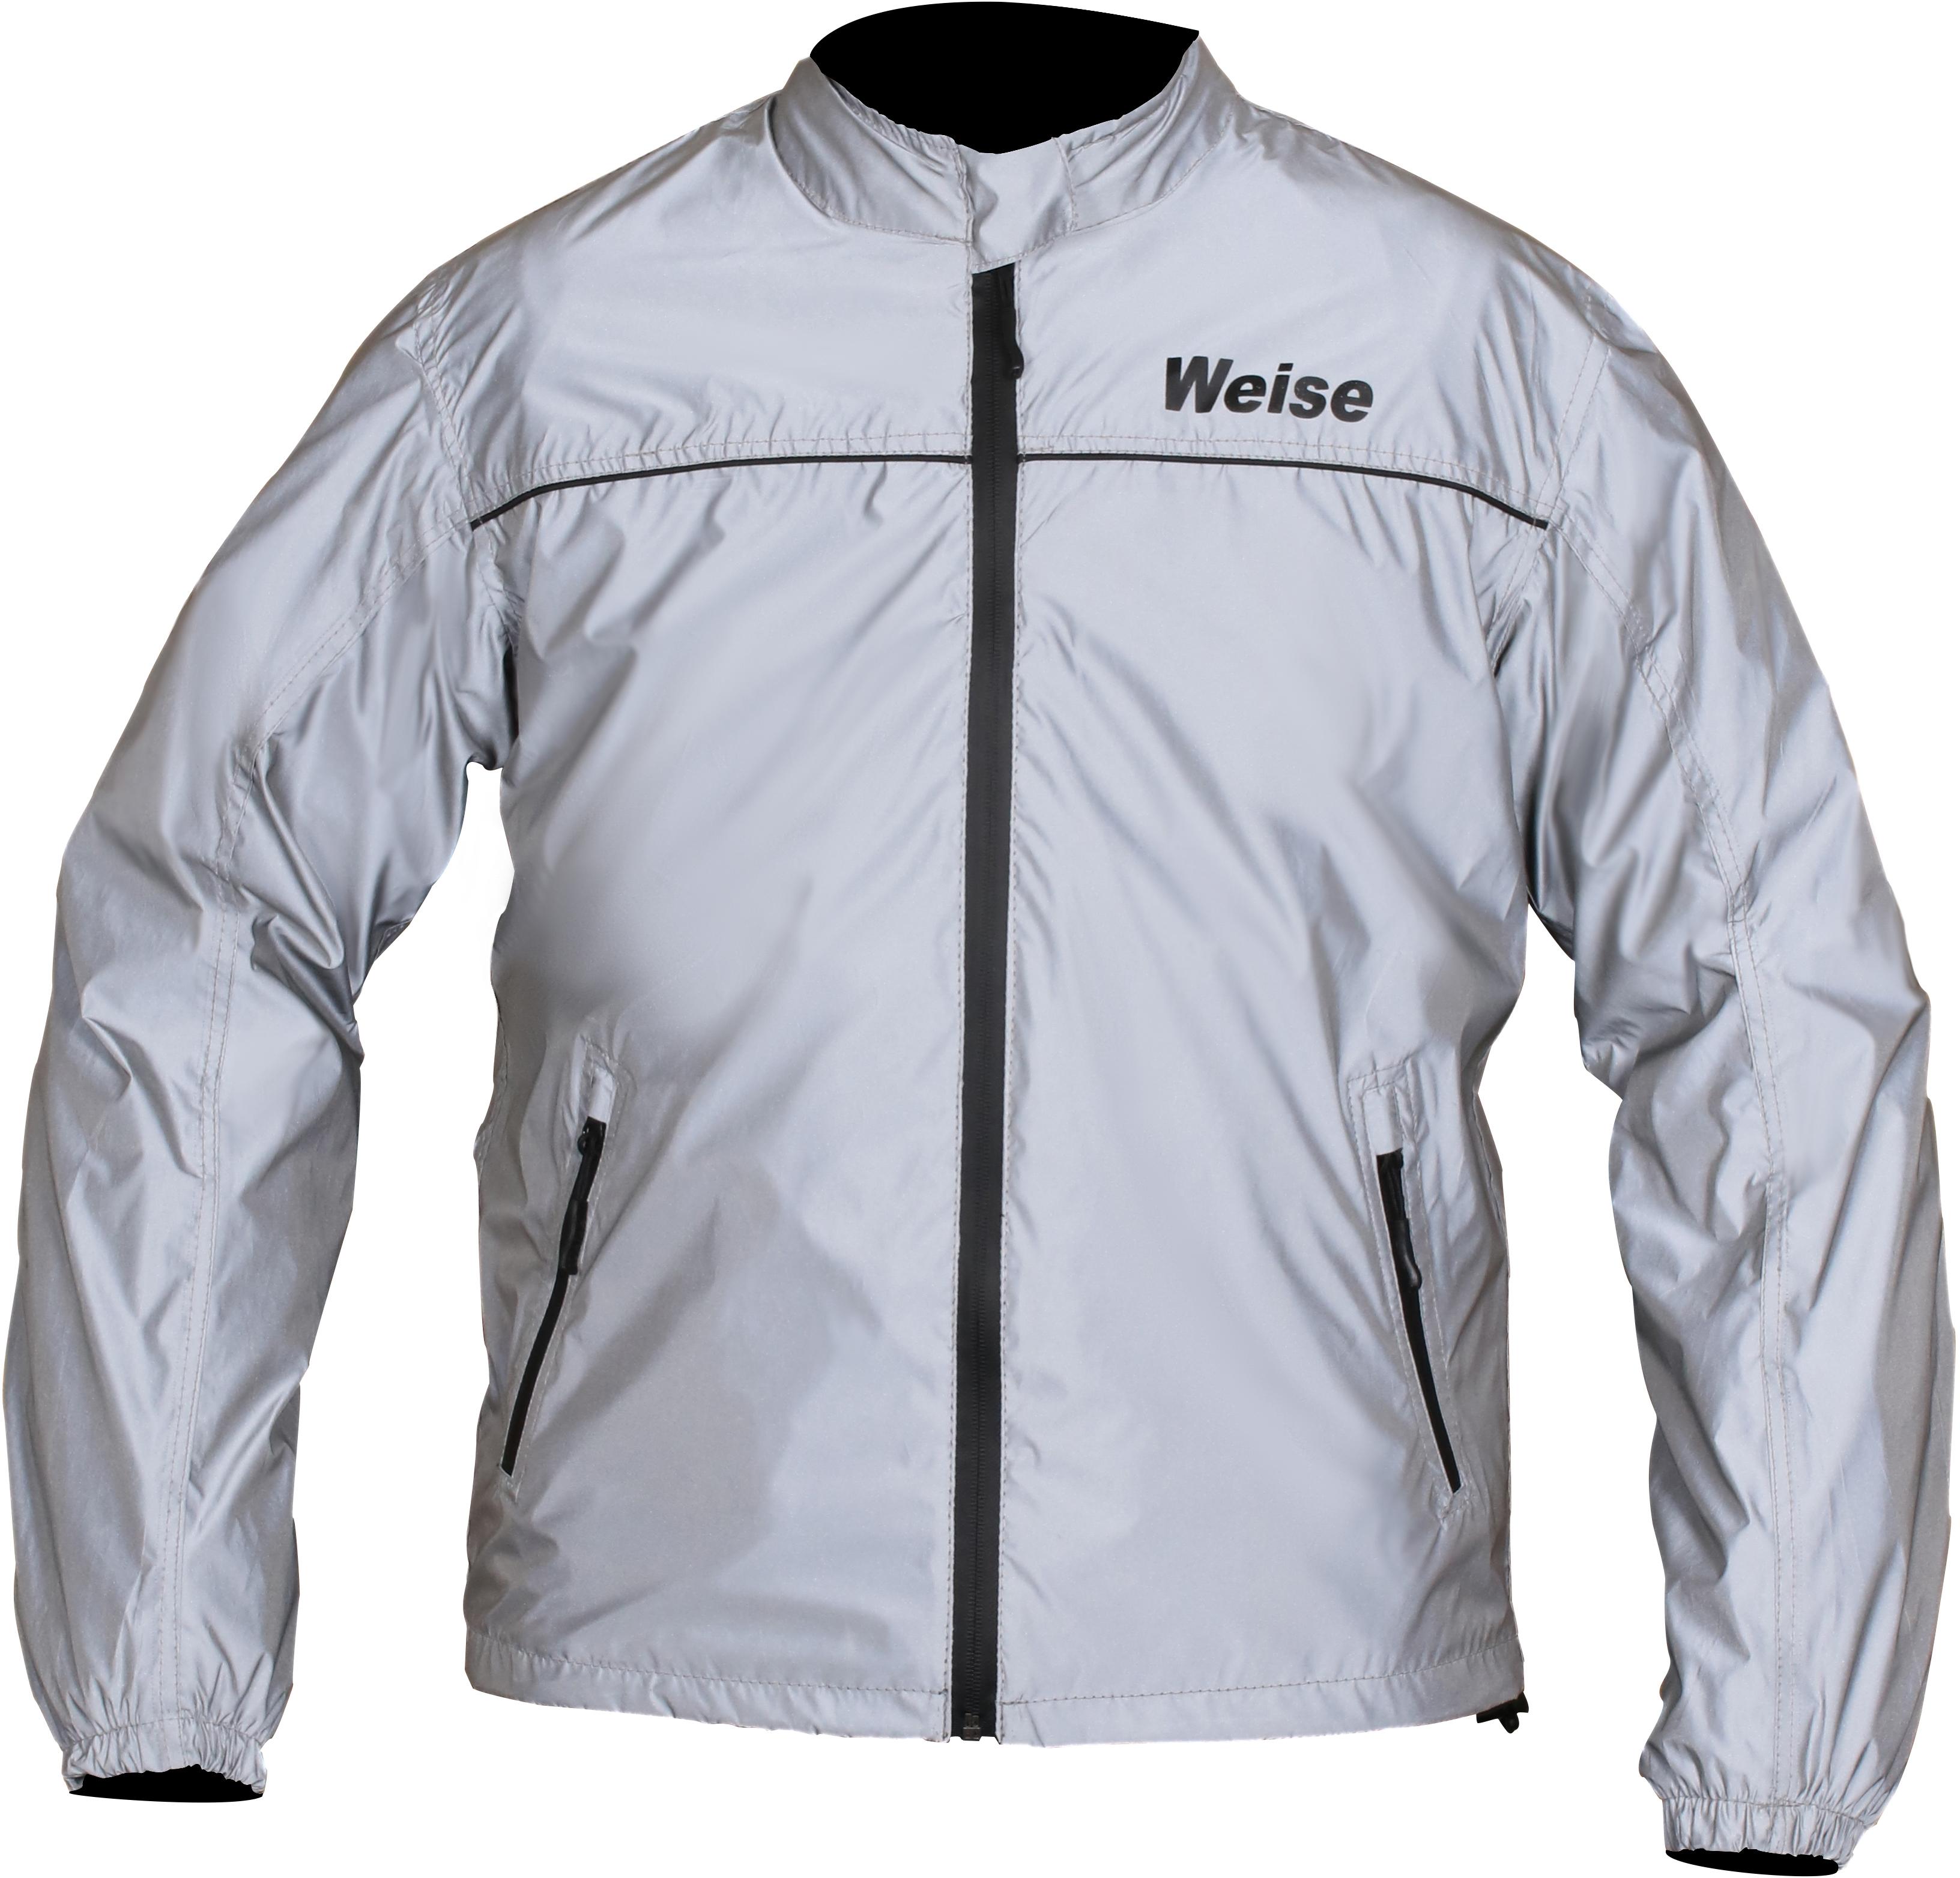 Weise Vision Jacket Sm